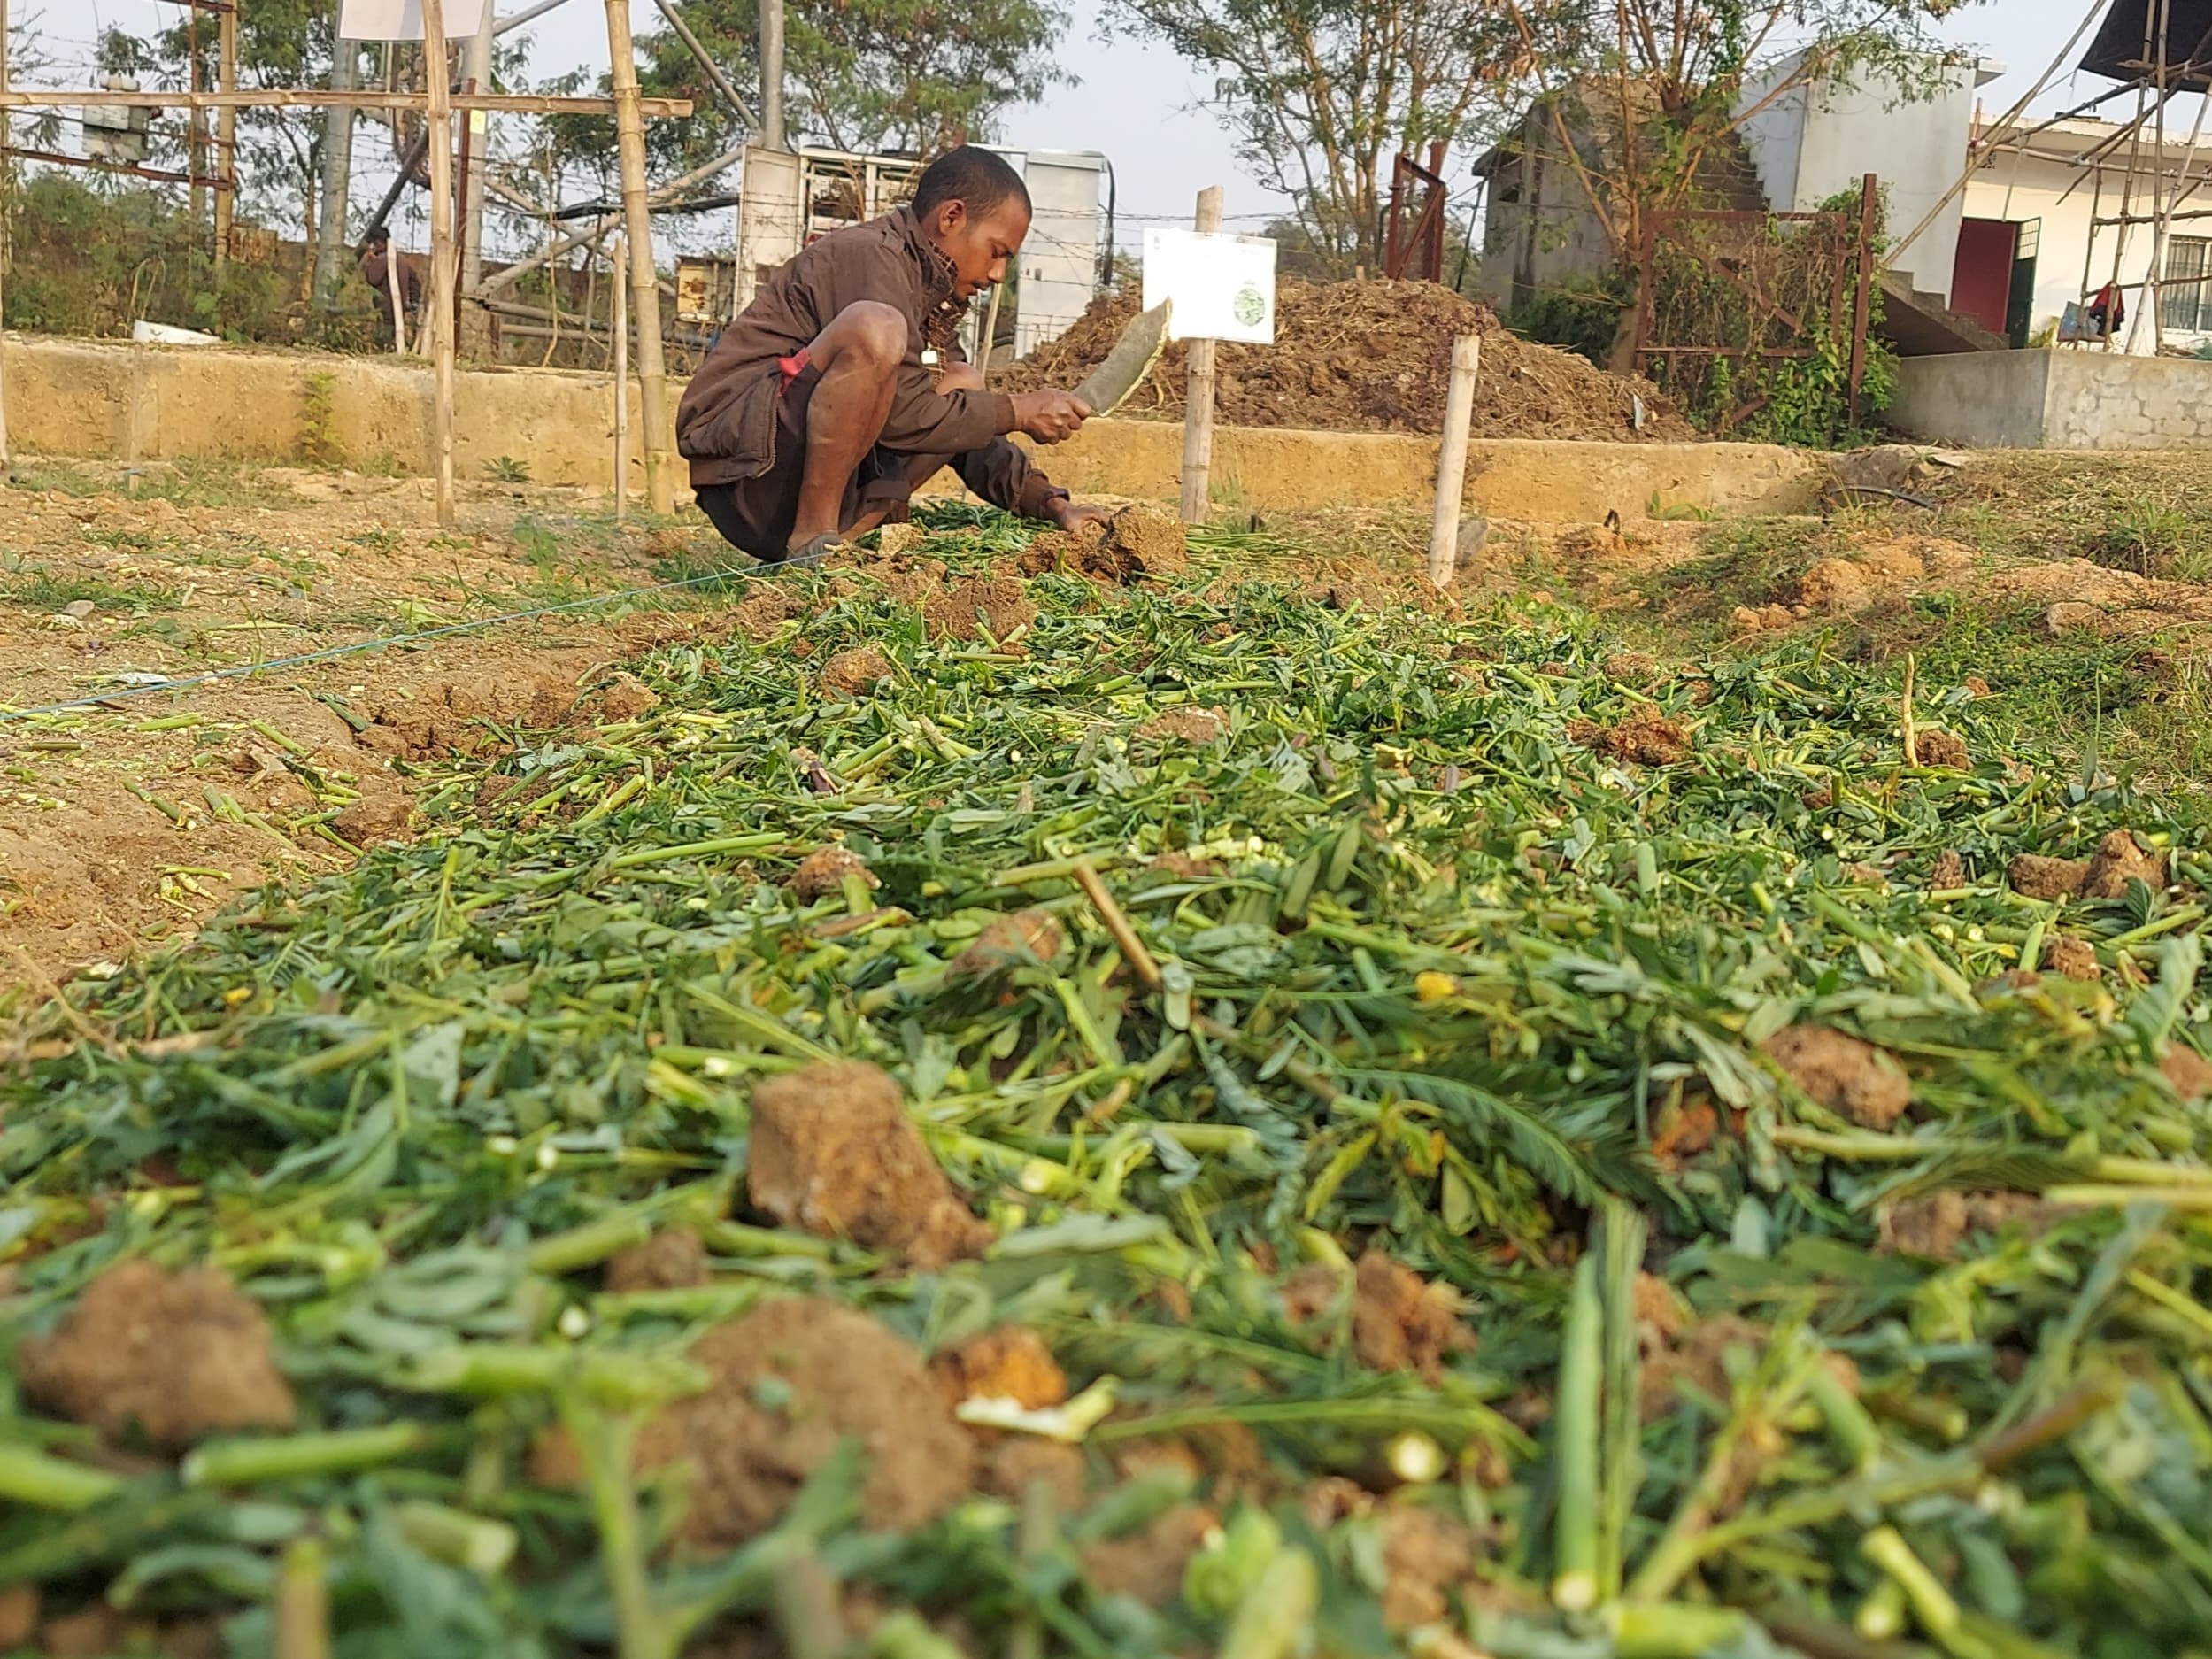 Man chopping green manure plants into small pieces for incorporation into the soil.